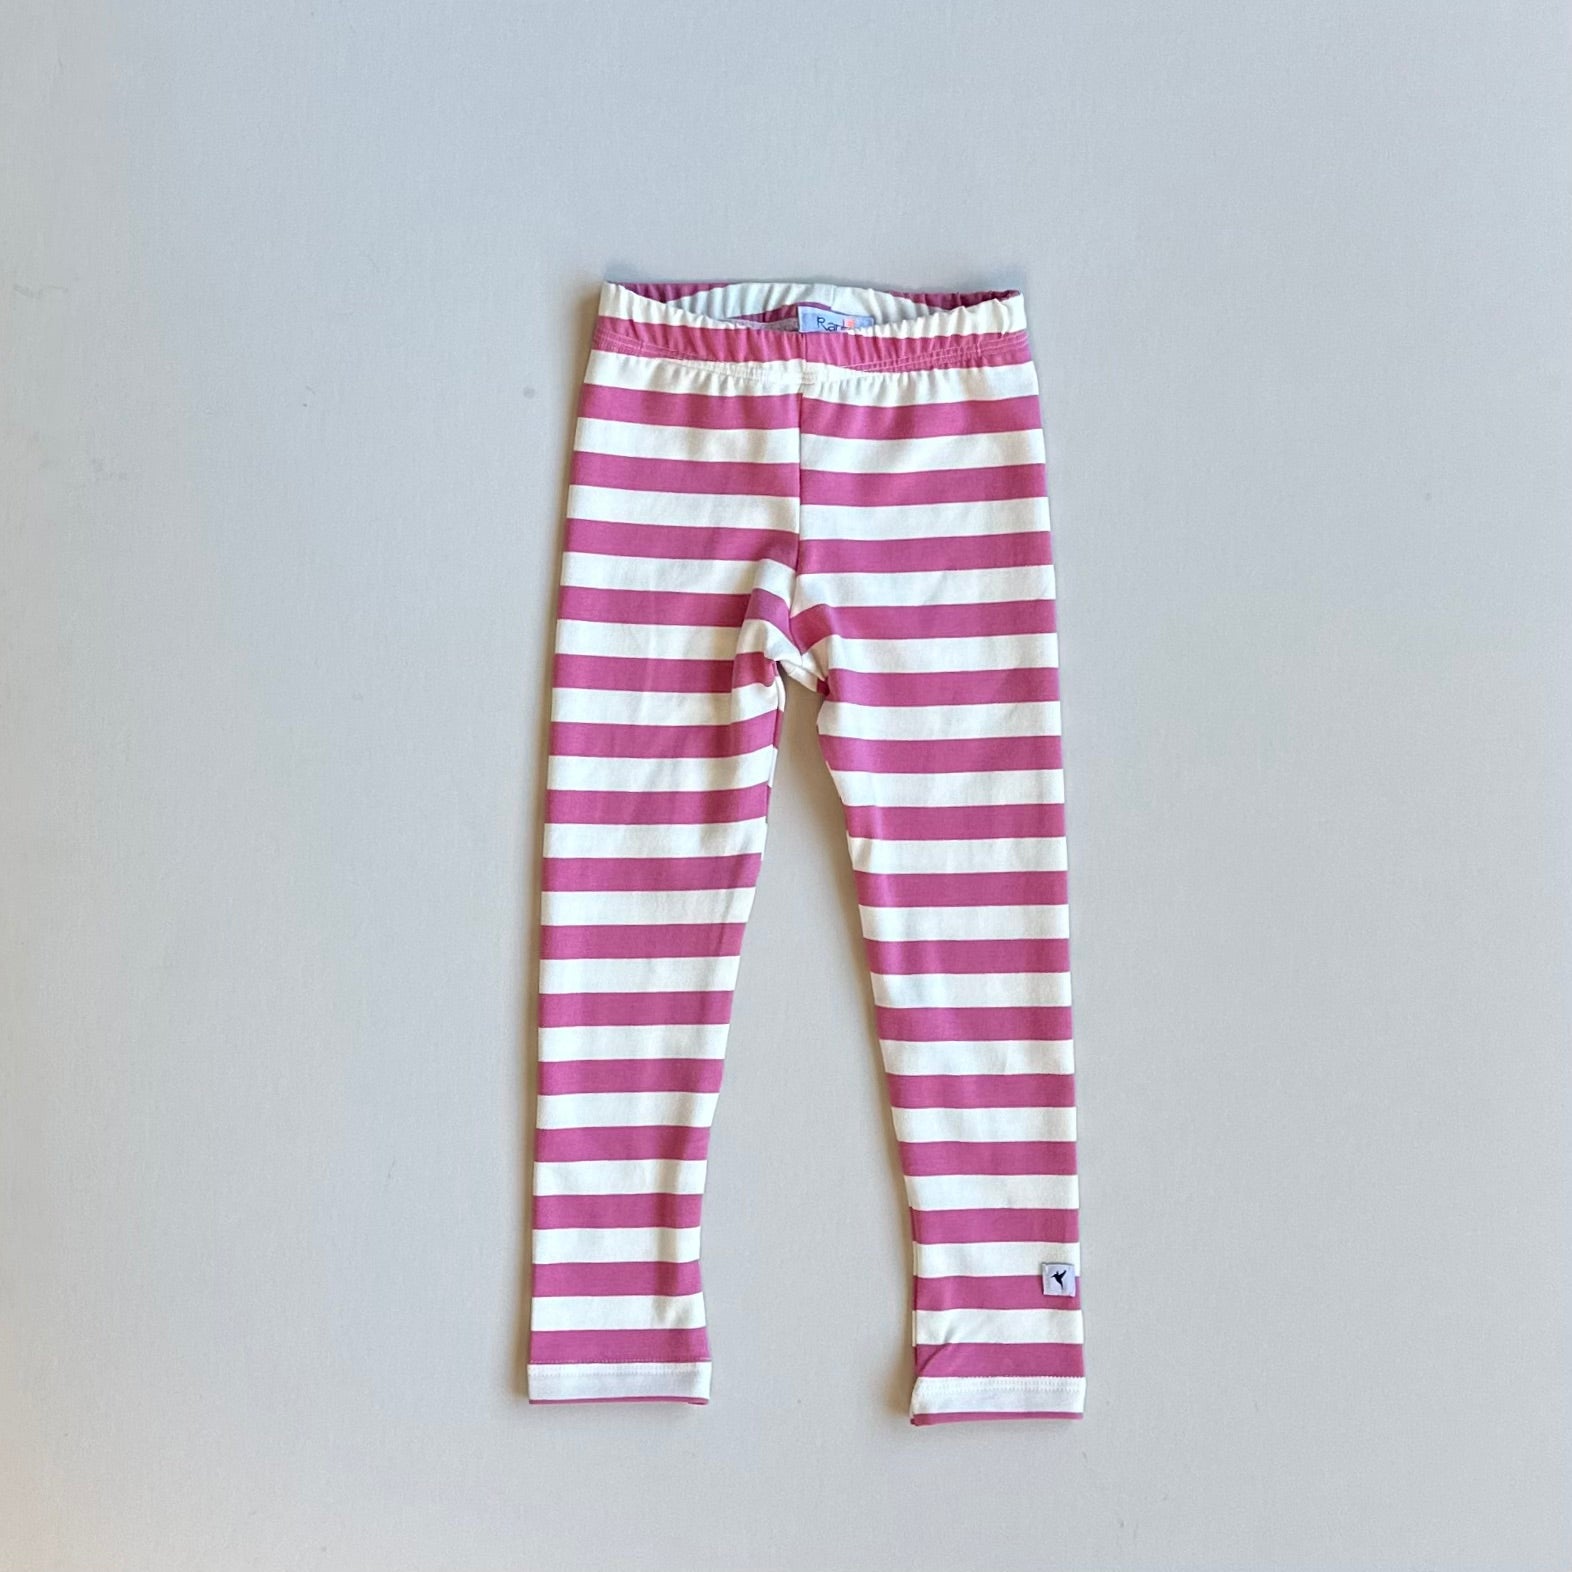 Leggings Handmade in Victoria, BC, Canada for Kids in Eco-Friendly Fabric, Pink Stripe